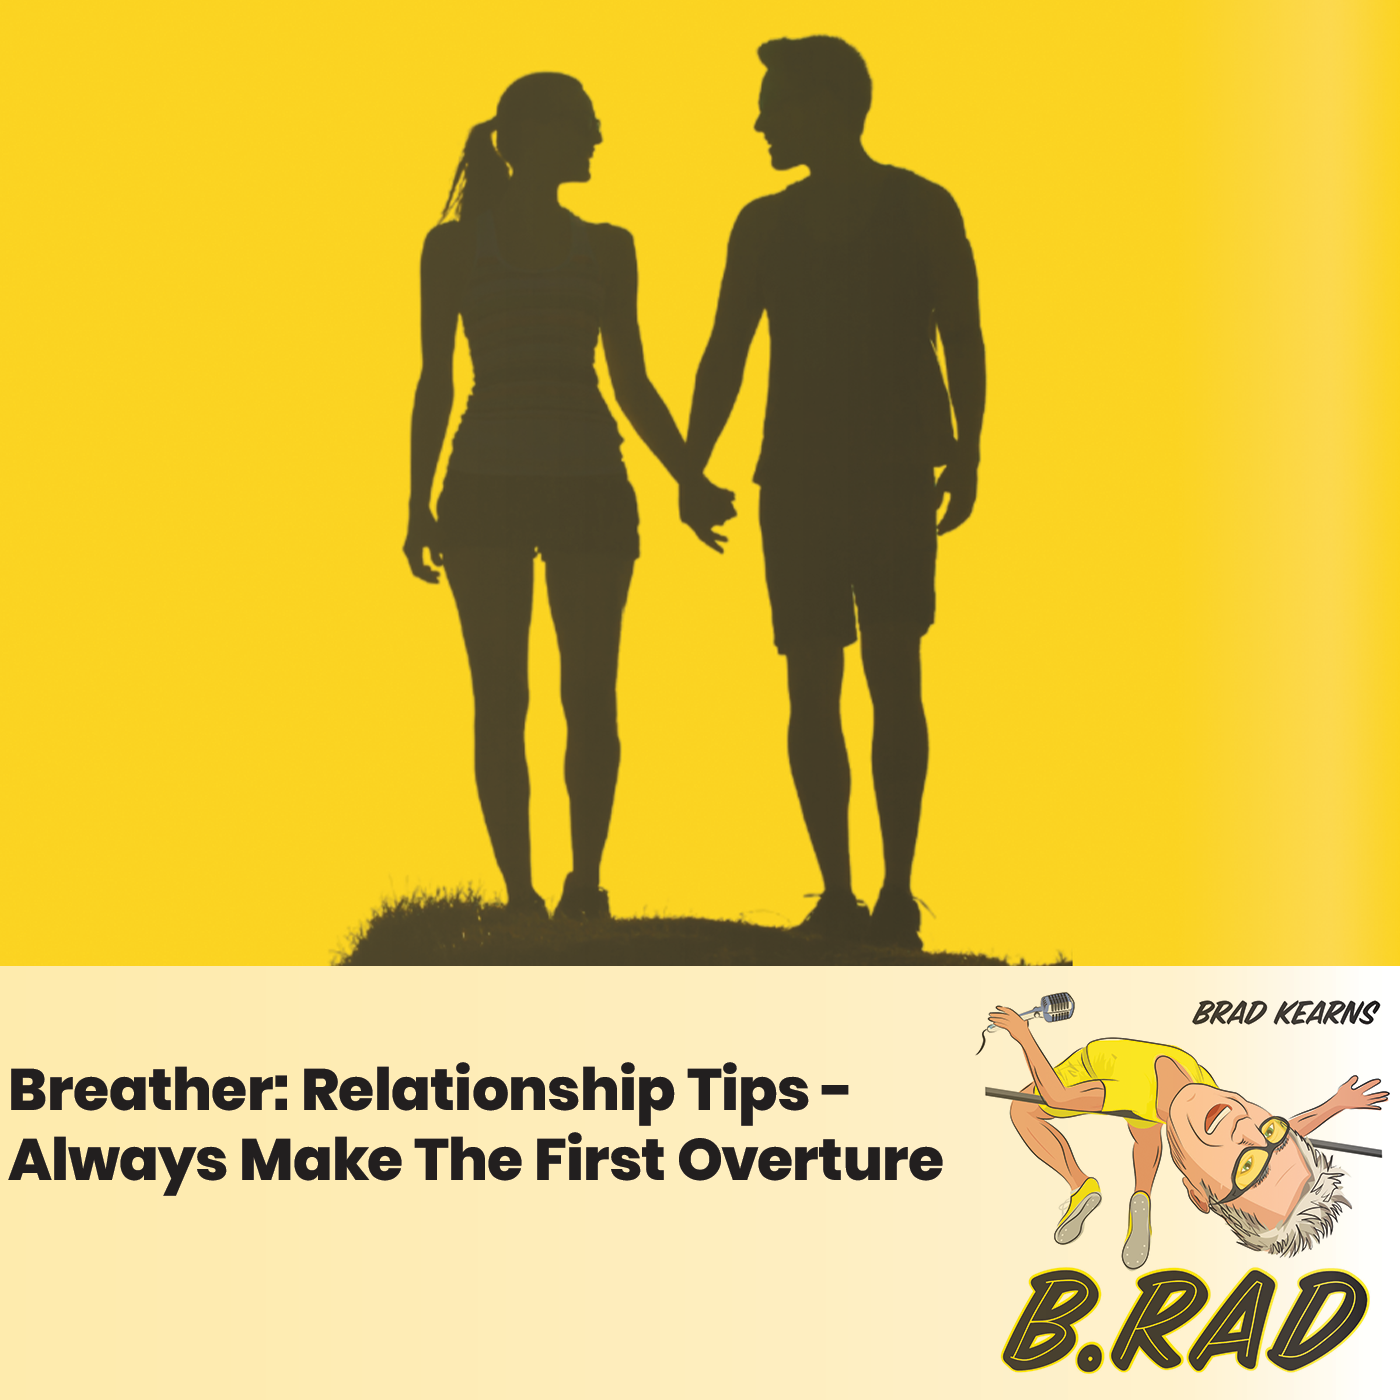 Breather: Relationship Tips - Always Make The First Overture